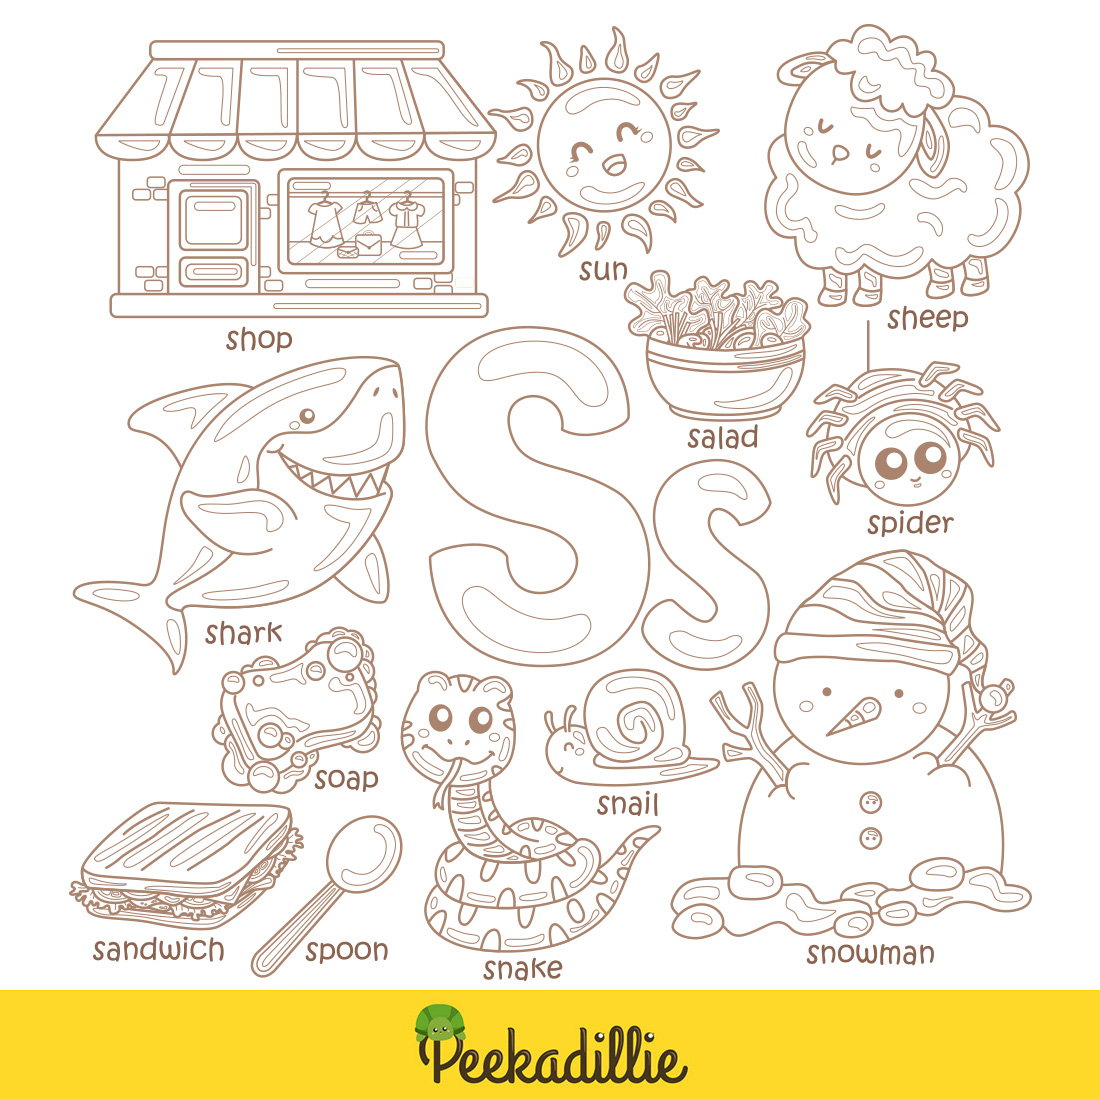 Alphabet S For Shark Sandwich Soap Snail Snake Salad Spoon Snowman Spider Shop Sheep Sun Vocabulary School Lesson Cartoon Digital Stamp Outline Black and White preview image.